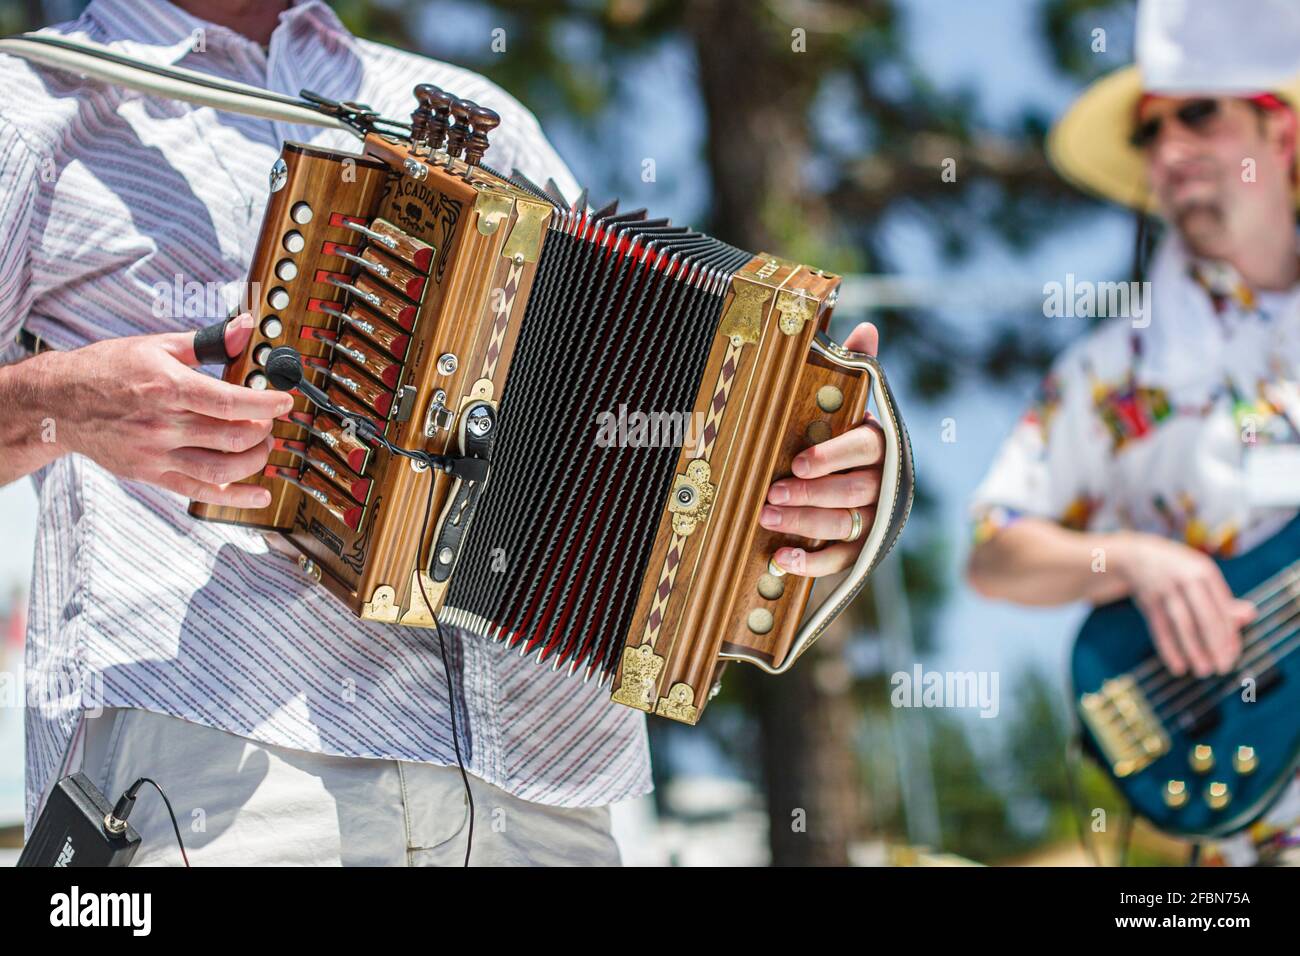 Deerfield Beach Florida Quiet Waters Park Zydeco Festival,Cajun music accordion bellows musician playing squeezebox, Stock Photo